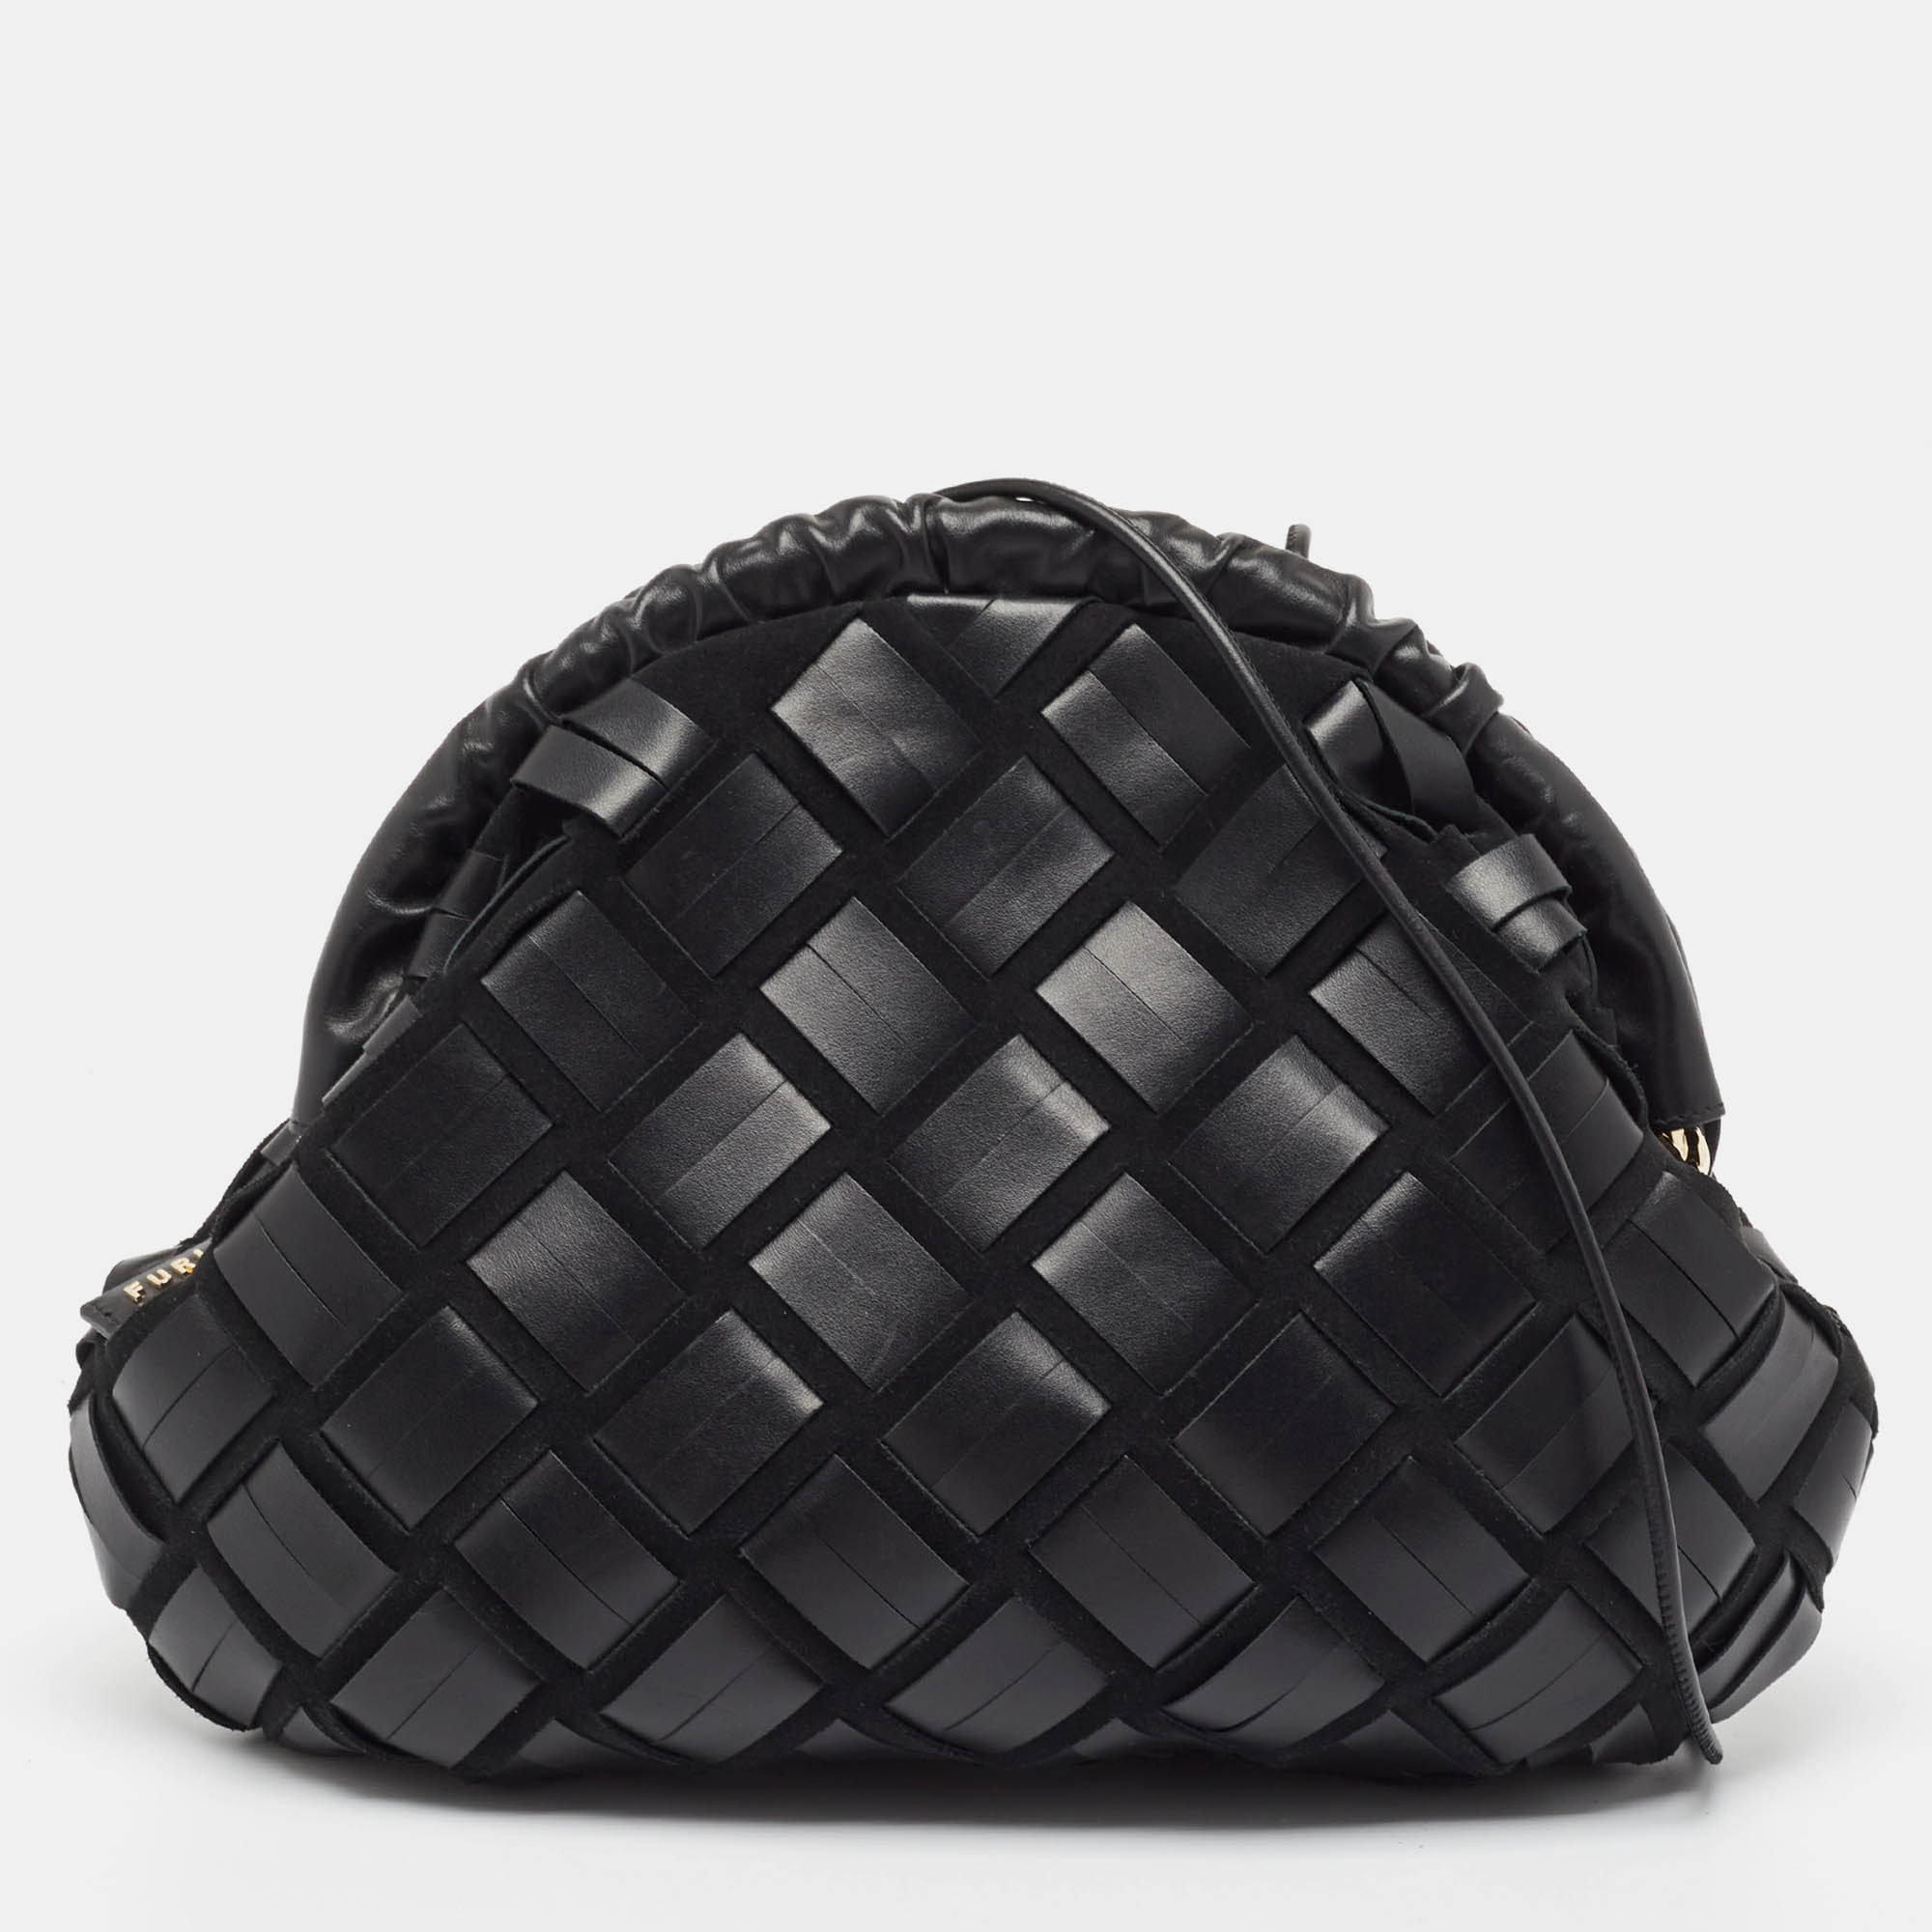 

Furla Black Woven Leather and Suede Essentials Clutch Bag